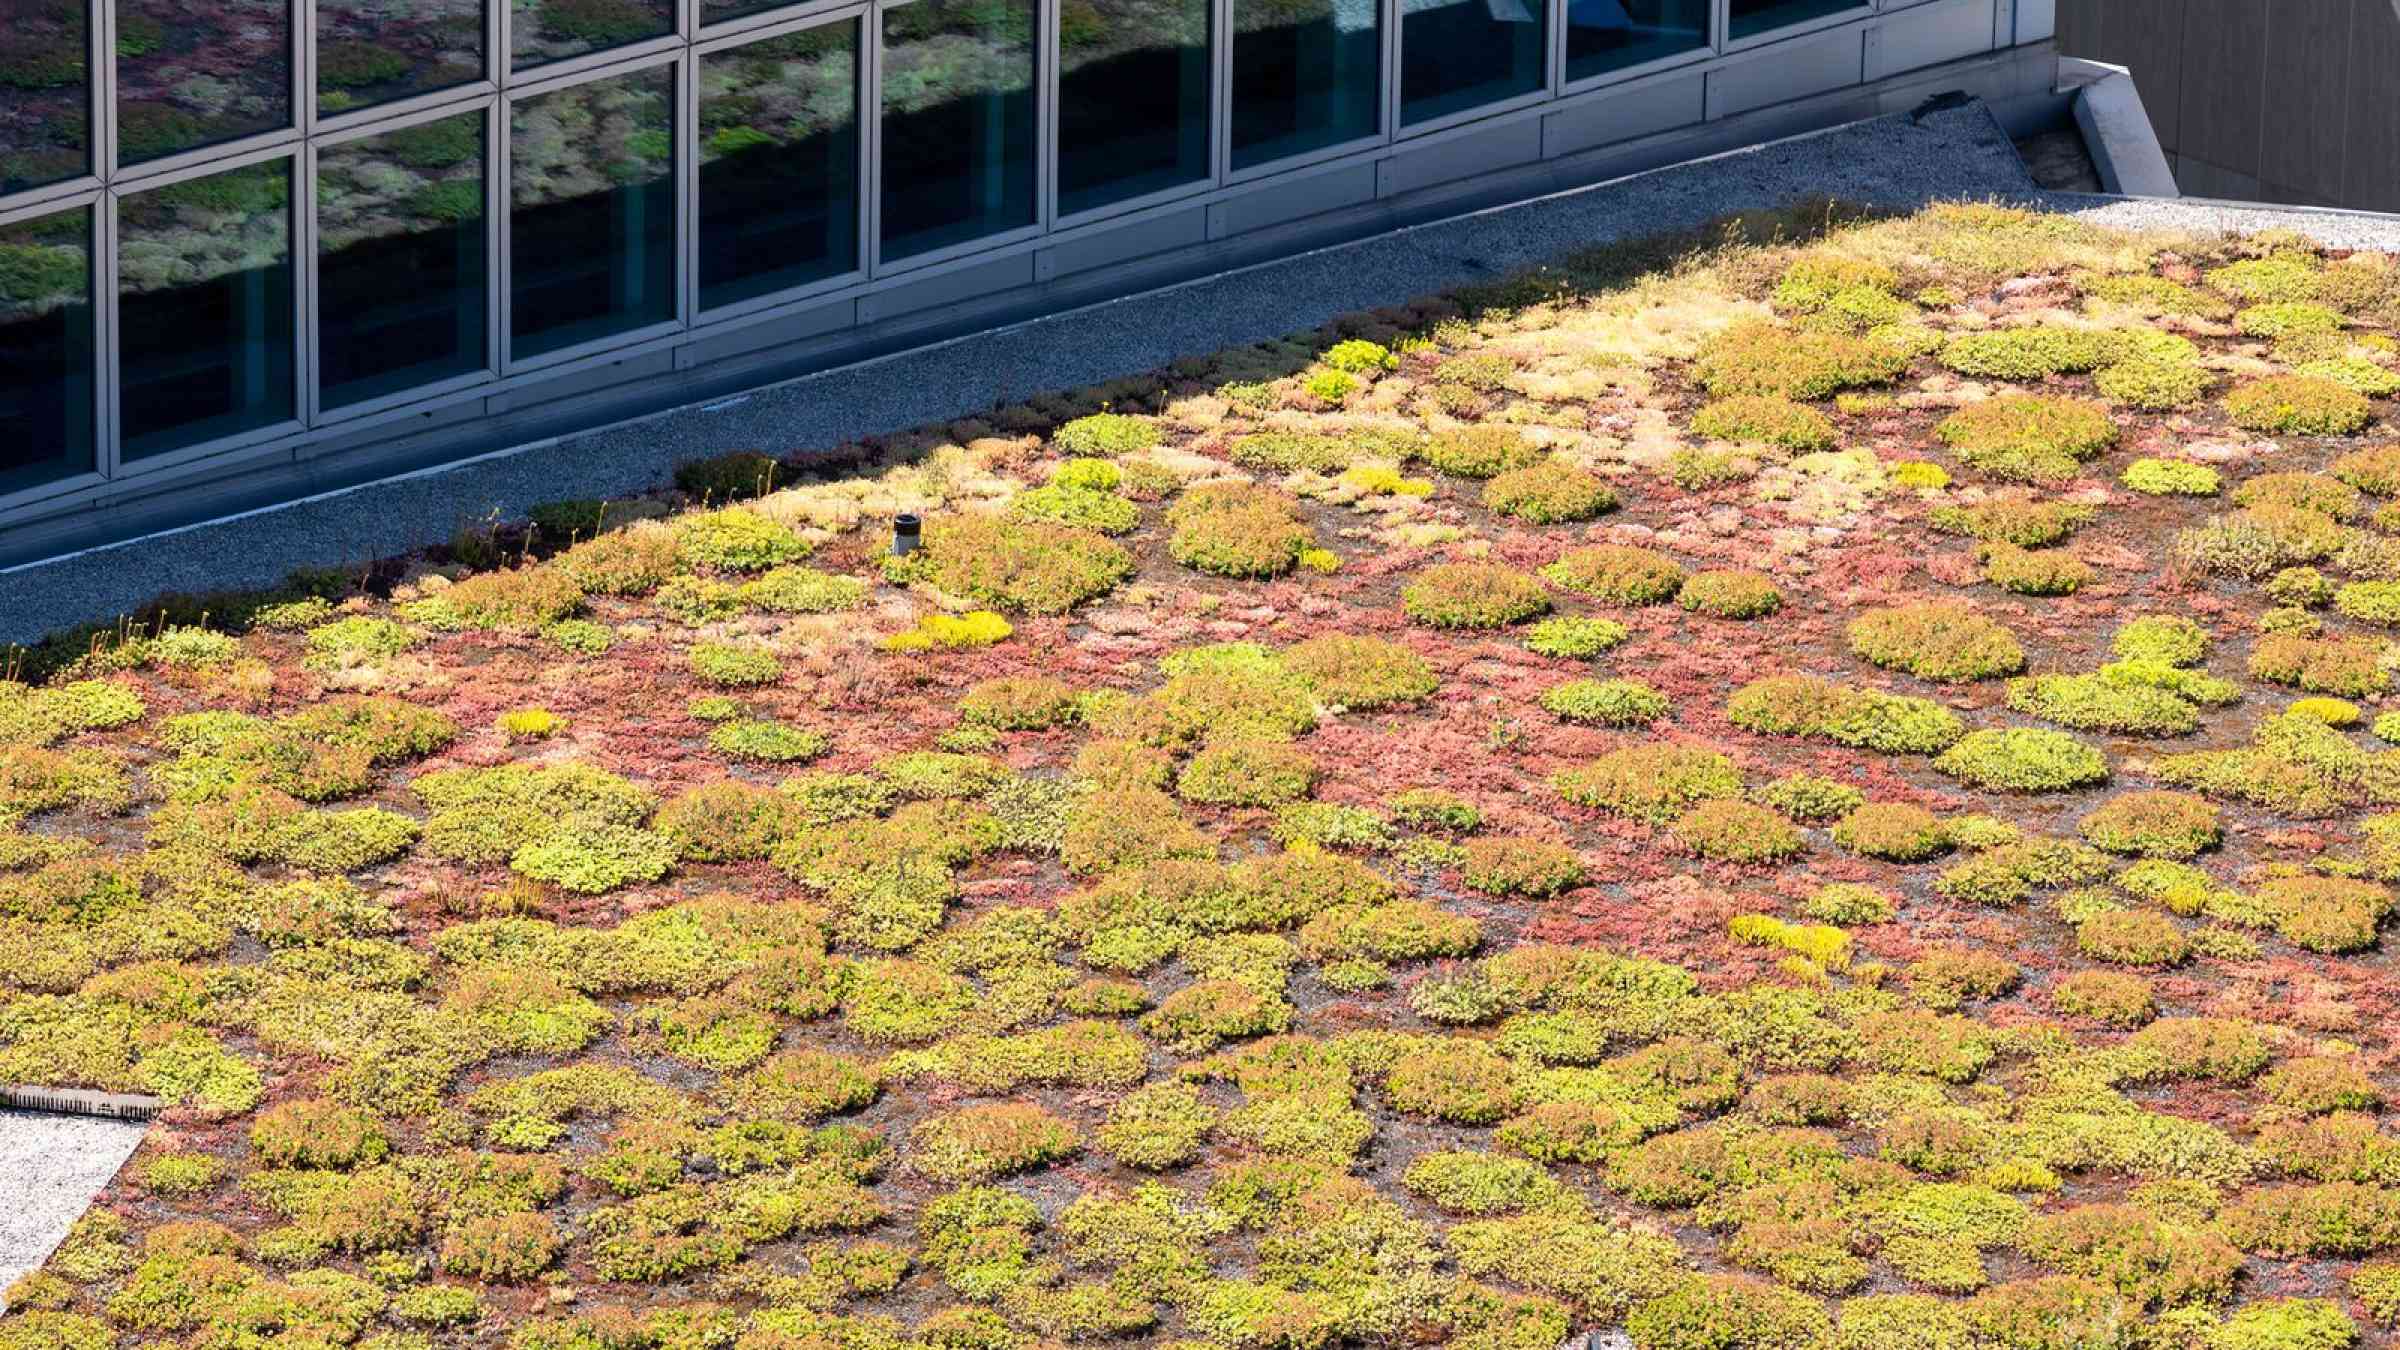 Green roof at the WIPO headquarters building